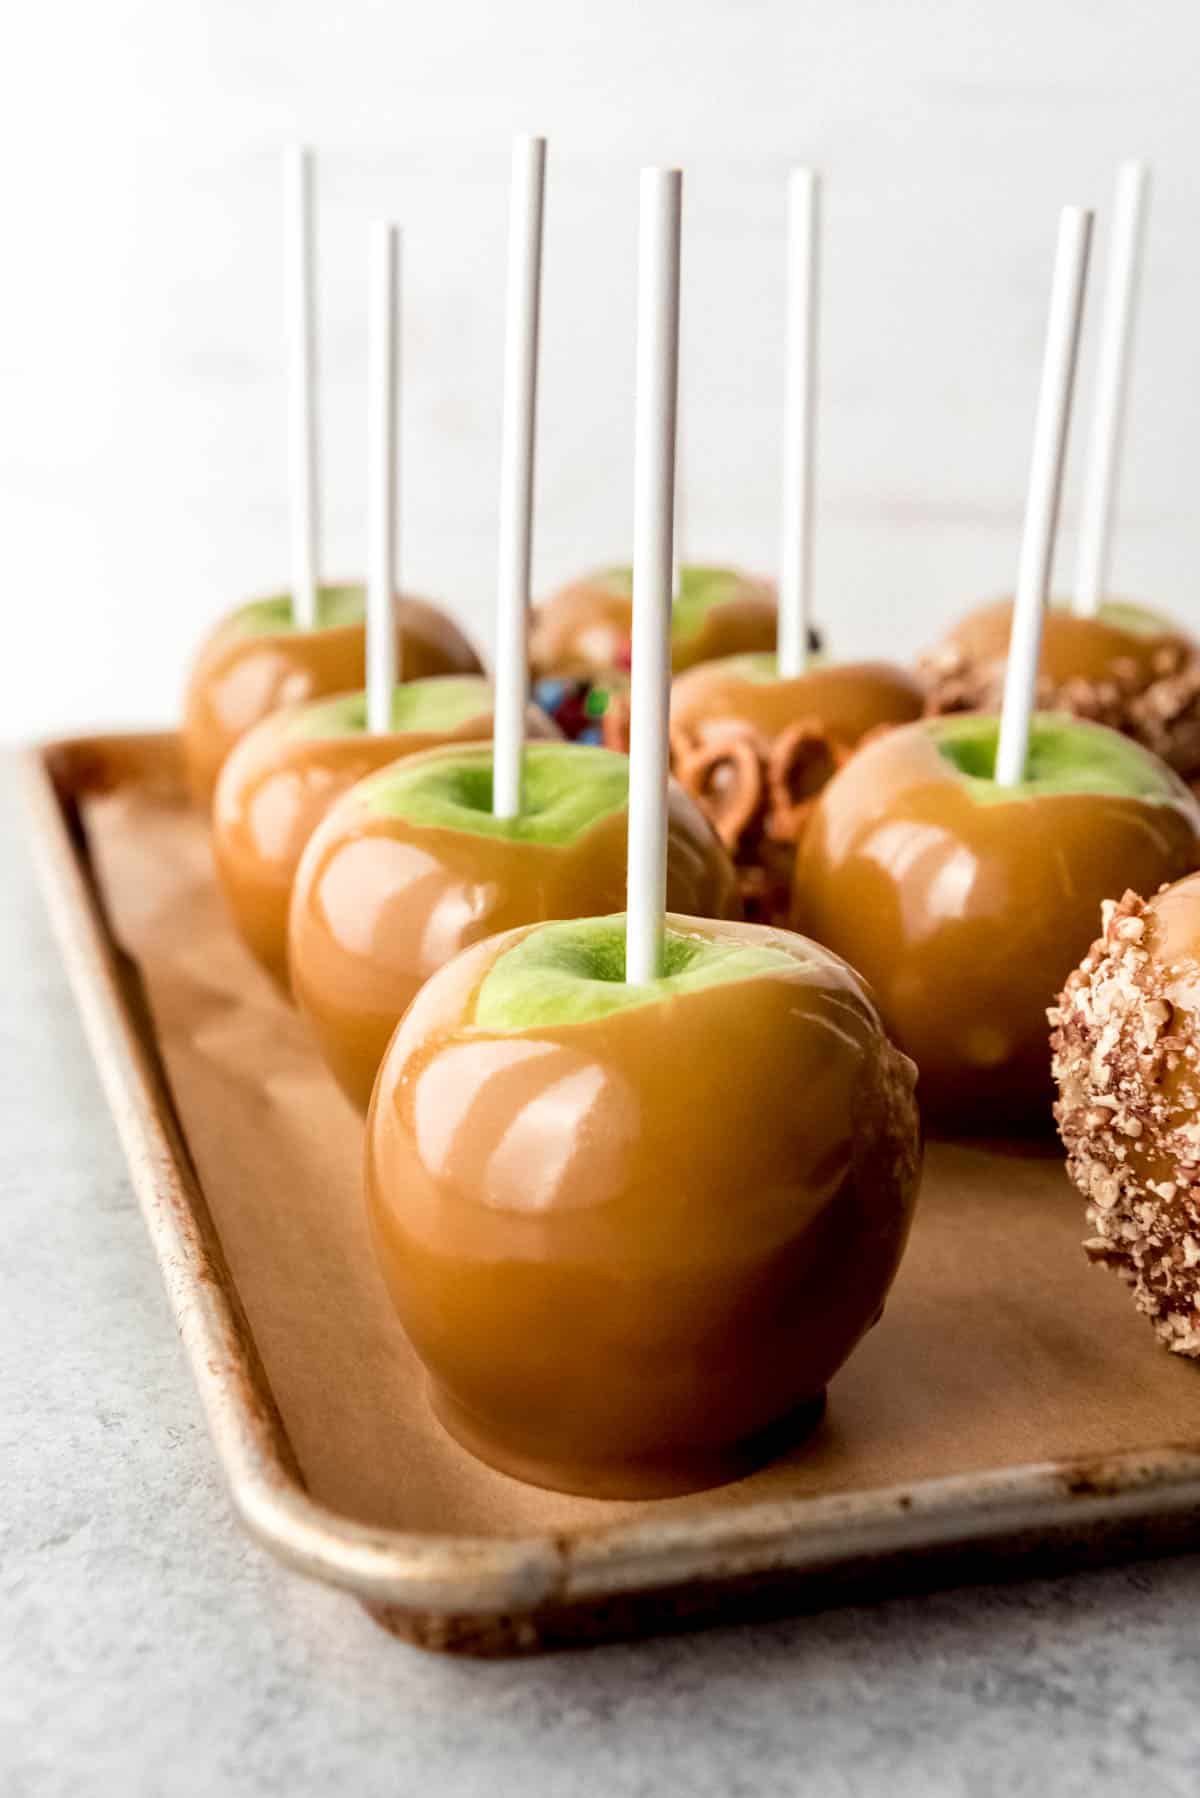 Rows of homemade caramel apples on a baking sheet lined with parchment paper.